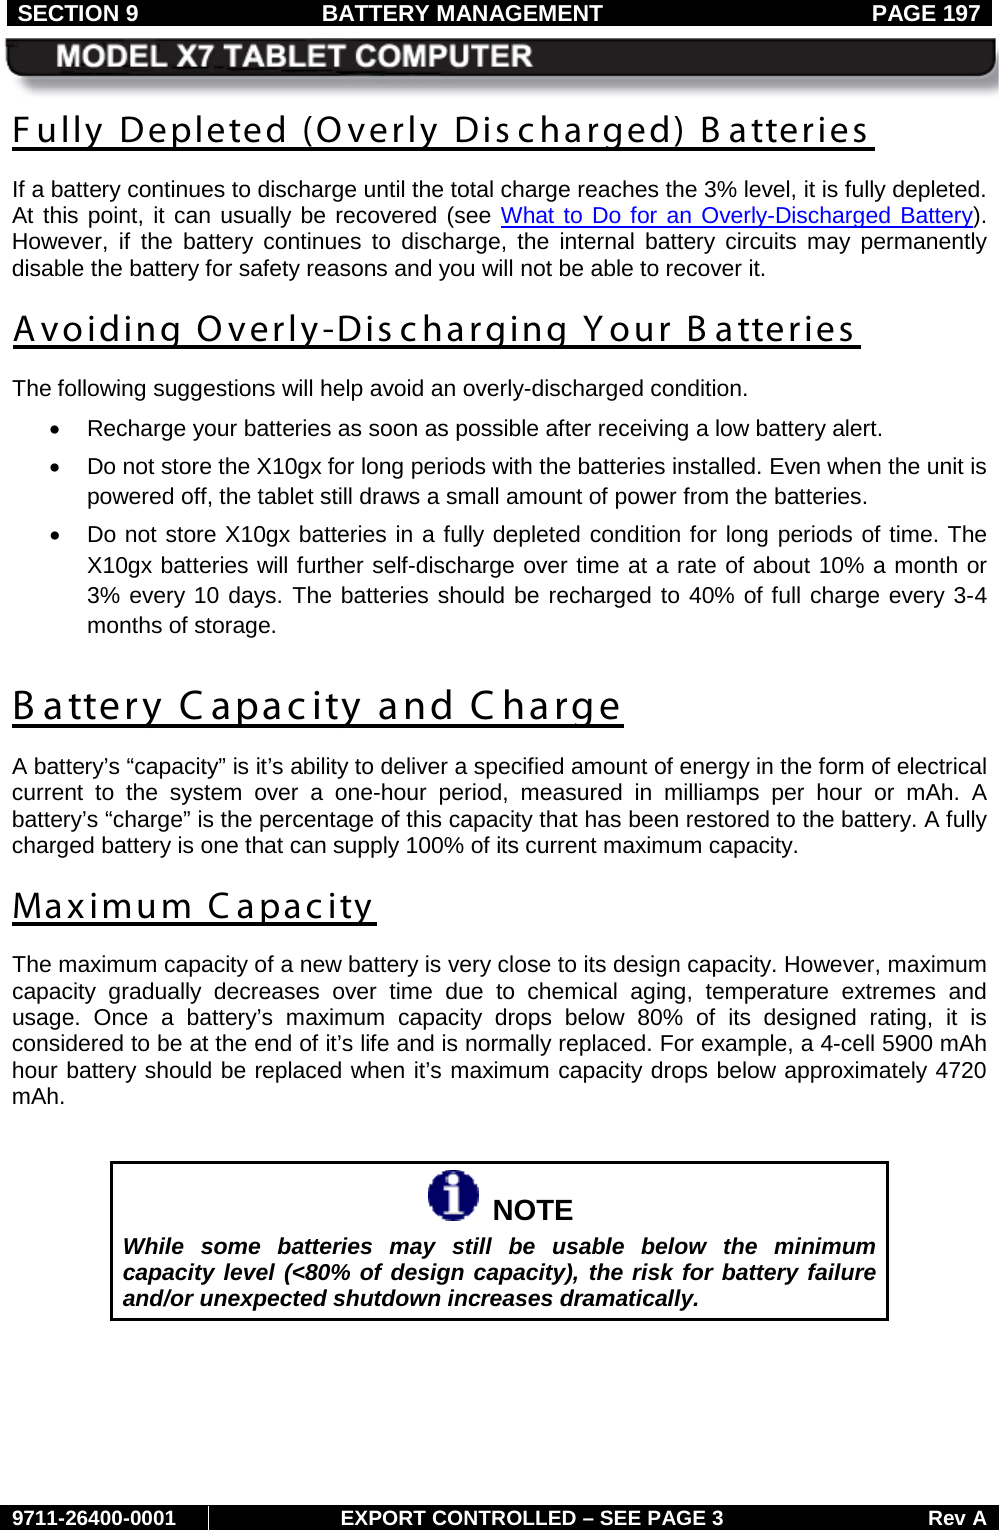 SECTION 9 BATTERY MANAGEMENT  PAGE 197     9711-26400-0001 EXPORT CONTROLLED – SEE PAGE 3 Rev A Fully Depleted (Overly Dis charged) B atteries  If a battery continues to discharge until the total charge reaches the 3% level, it is fully depleted. At this point, it can usually be recovered (see What to Do for an Overly-Discharged Battery). However, if the battery continues to discharge, the internal battery circuits may permanently disable the battery for safety reasons and you will not be able to recover it. Avoiding Overly-Discharging Your B atteries  The following suggestions will help avoid an overly-discharged condition. • Recharge your batteries as soon as possible after receiving a low battery alert. • Do not store the X10gx for long periods with the batteries installed. Even when the unit is powered off, the tablet still draws a small amount of power from the batteries. • Do not store X10gx batteries in a fully depleted condition for long periods of time. The X10gx batteries will further self-discharge over time at a rate of about 10% a month or 3% every 10 days. The batteries should be recharged to 40% of full charge every 3-4 months of storage. Battery Capacity and Charge A battery’s “capacity” is it’s ability to deliver a specified amount of energy in the form of electrical current to the system over a one-hour period,  measured in milliamps per hour or mAh. A battery’s “charge” is the percentage of this capacity that has been restored to the battery. A fully charged battery is one that can supply 100% of its current maximum capacity. Maximum Capacity The maximum capacity of a new battery is very close to its design capacity. However, maximum capacity gradually decreases over time due to chemical aging, temperature extremes and usage. Once a battery’s maximum  capacity drops below 80% of its designed rating, it is considered to be at the end of it’s life and is normally replaced. For example, a 4-cell 5900 mAh hour battery should be replaced when it’s maximum capacity drops below approximately 4720 mAh.     NOTE While some batteries may still be usable below the minimum capacity level (&lt;80% of design capacity), the risk for battery failure and/or unexpected shutdown increases dramatically.    